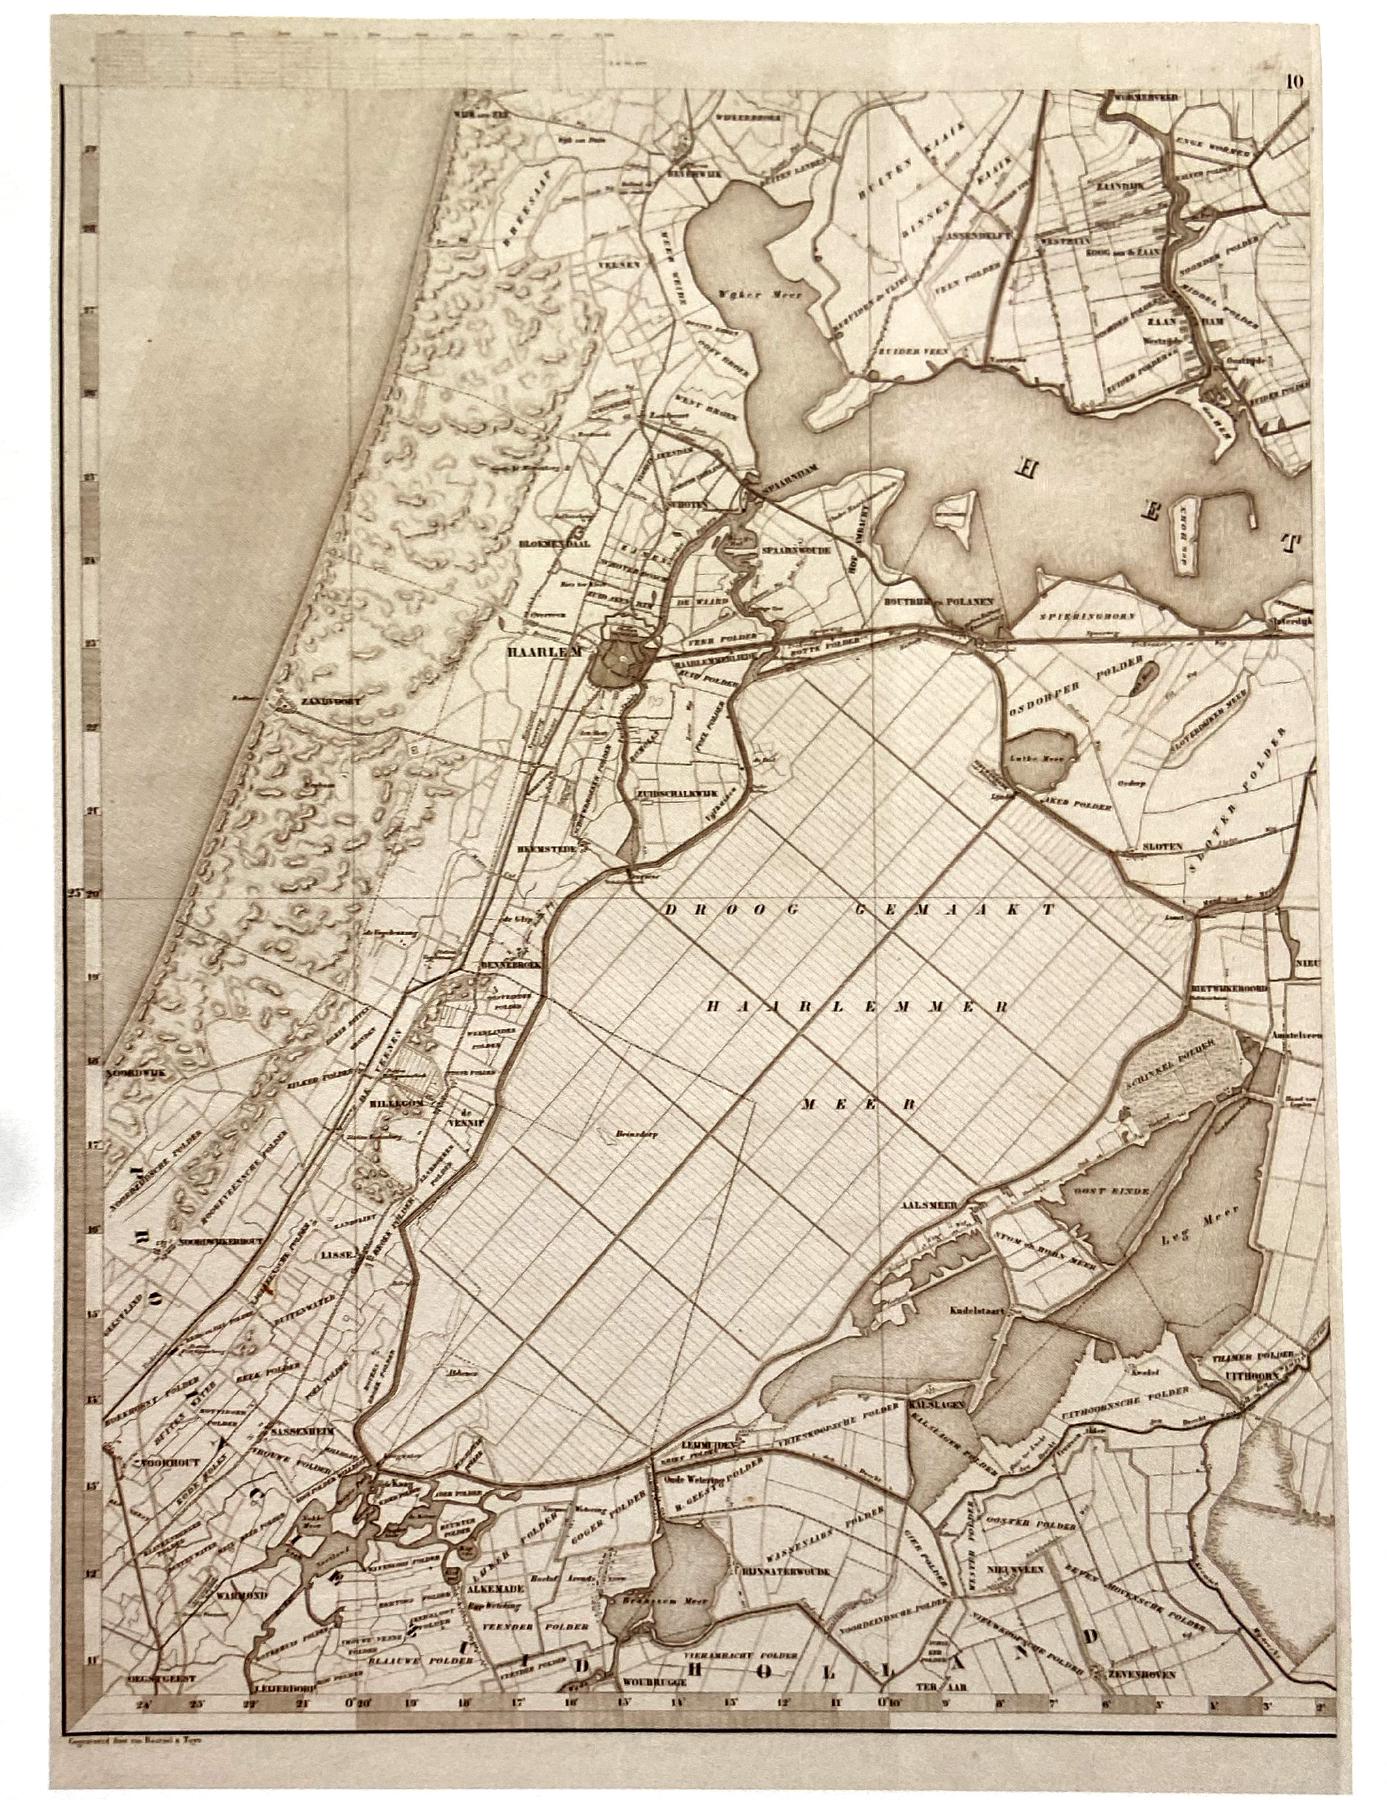 A map of the newly drained Harlemermeerpolder, showing the contrast between small scale peat reclamation around the edges of the polder and the master planned lines of the polder itself.